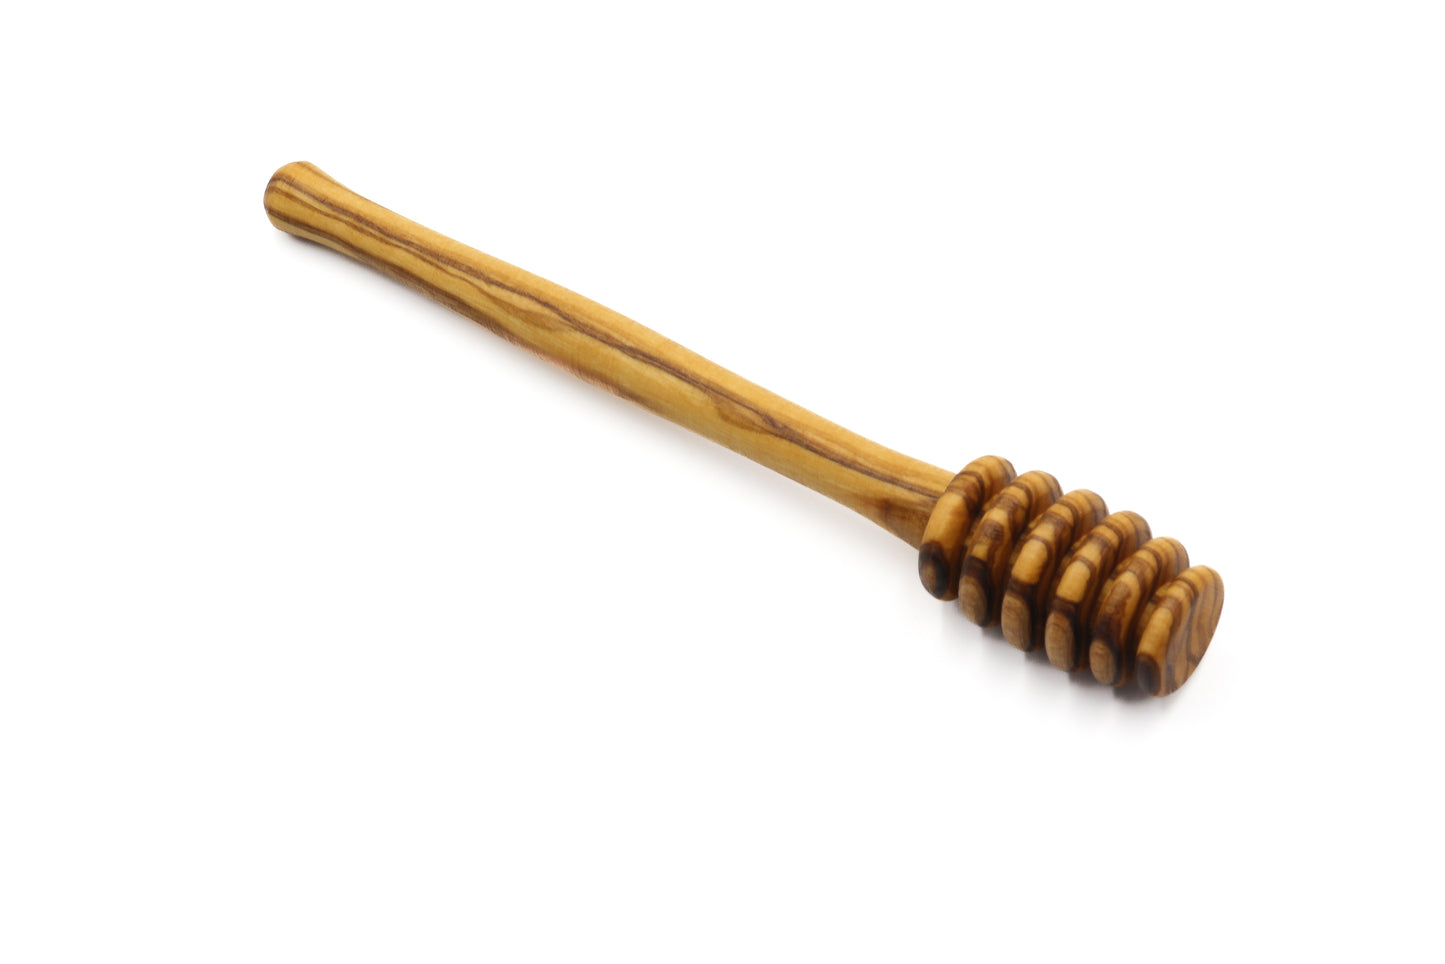 Unique wooden stick for honey collection and serving